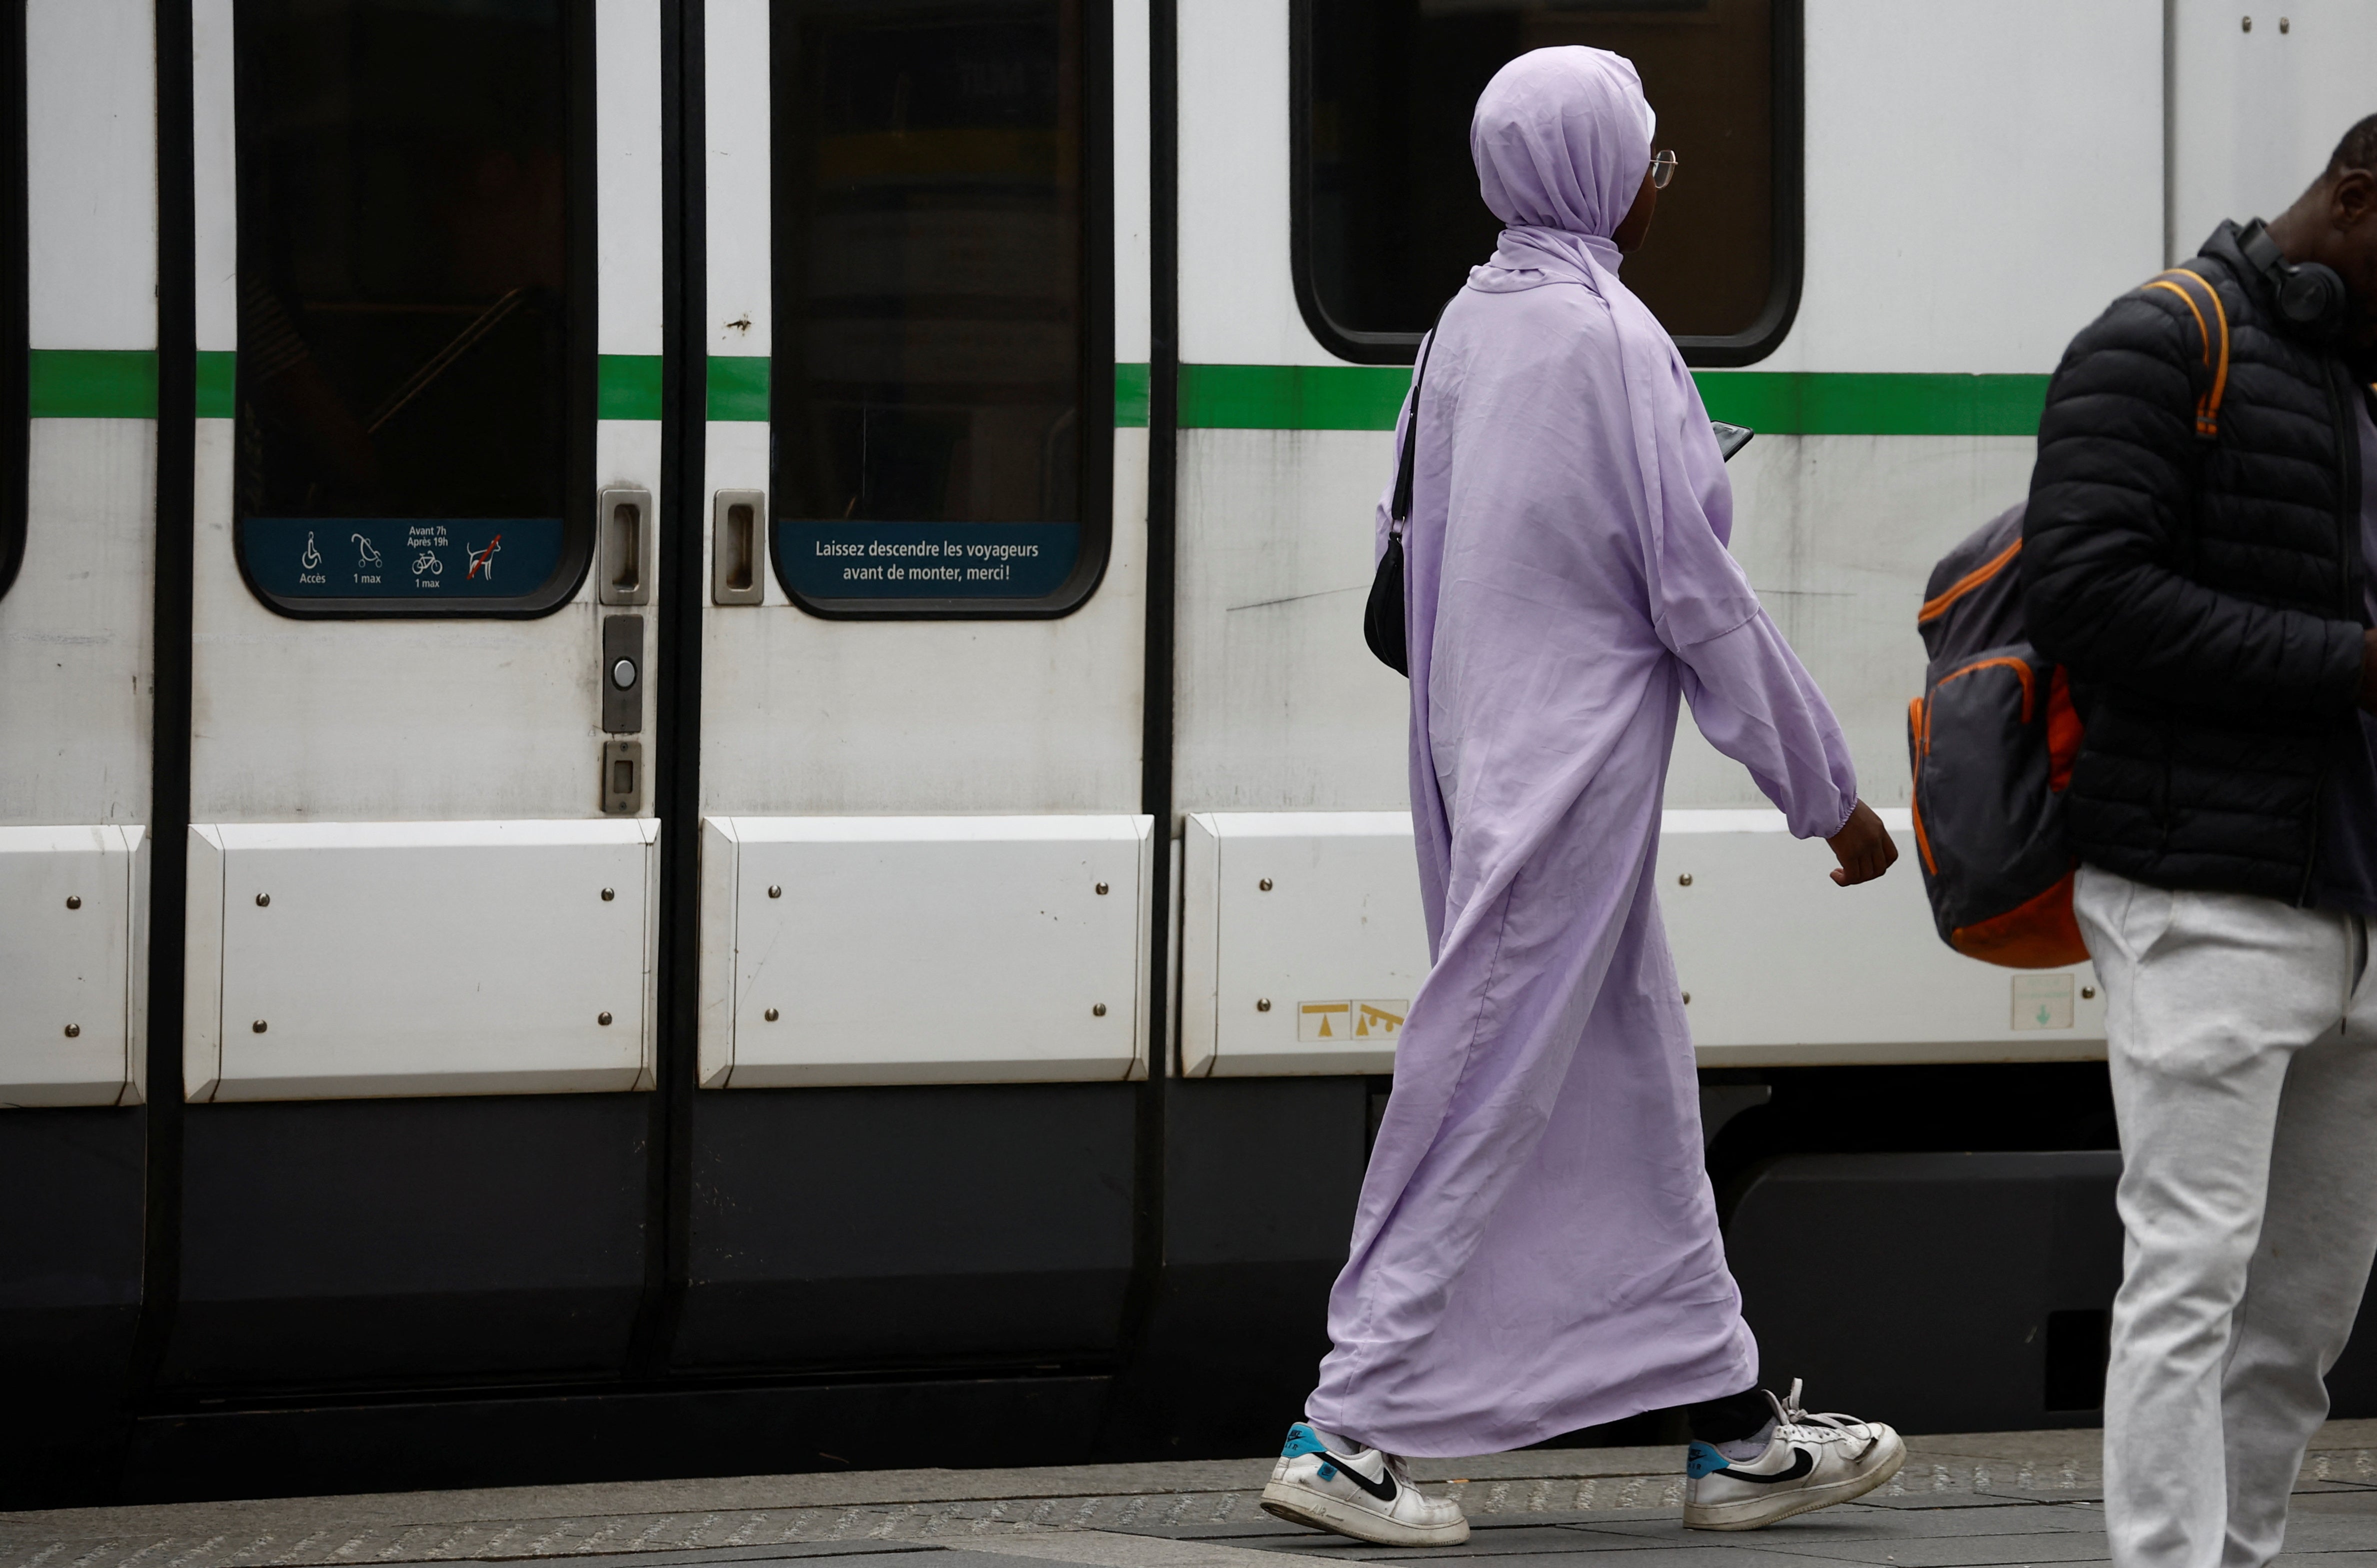 The French education minister reported that almost 300 pupils arrived at school on Monday wearing the abaya